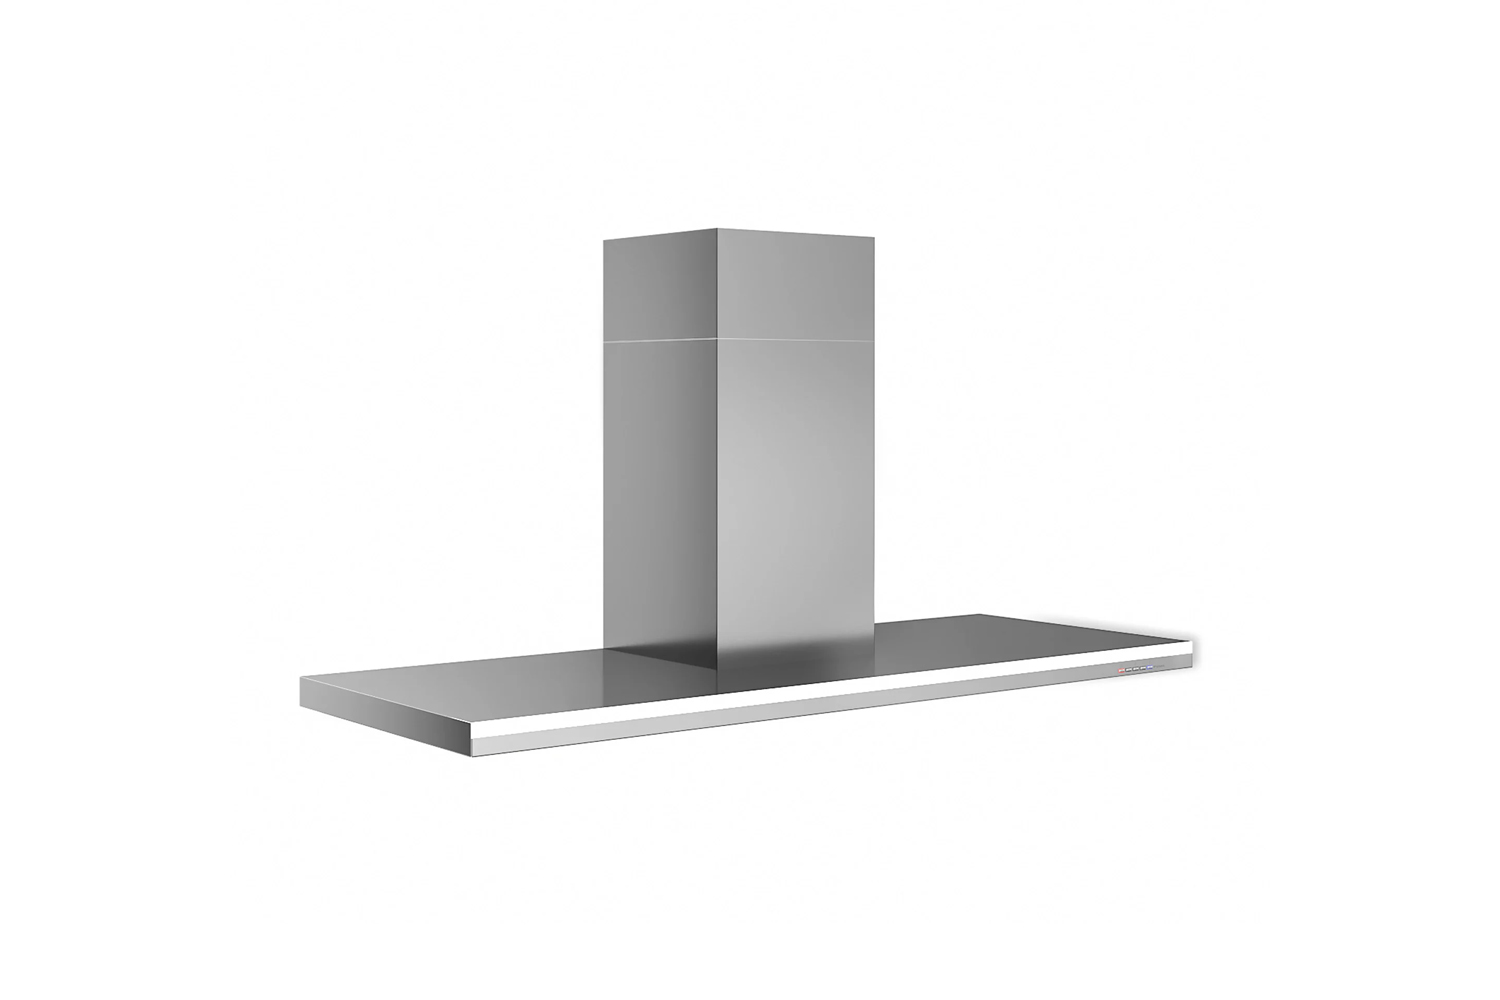 for a similar style of range hood to the one seen in the kitchen, the futuro fu 11